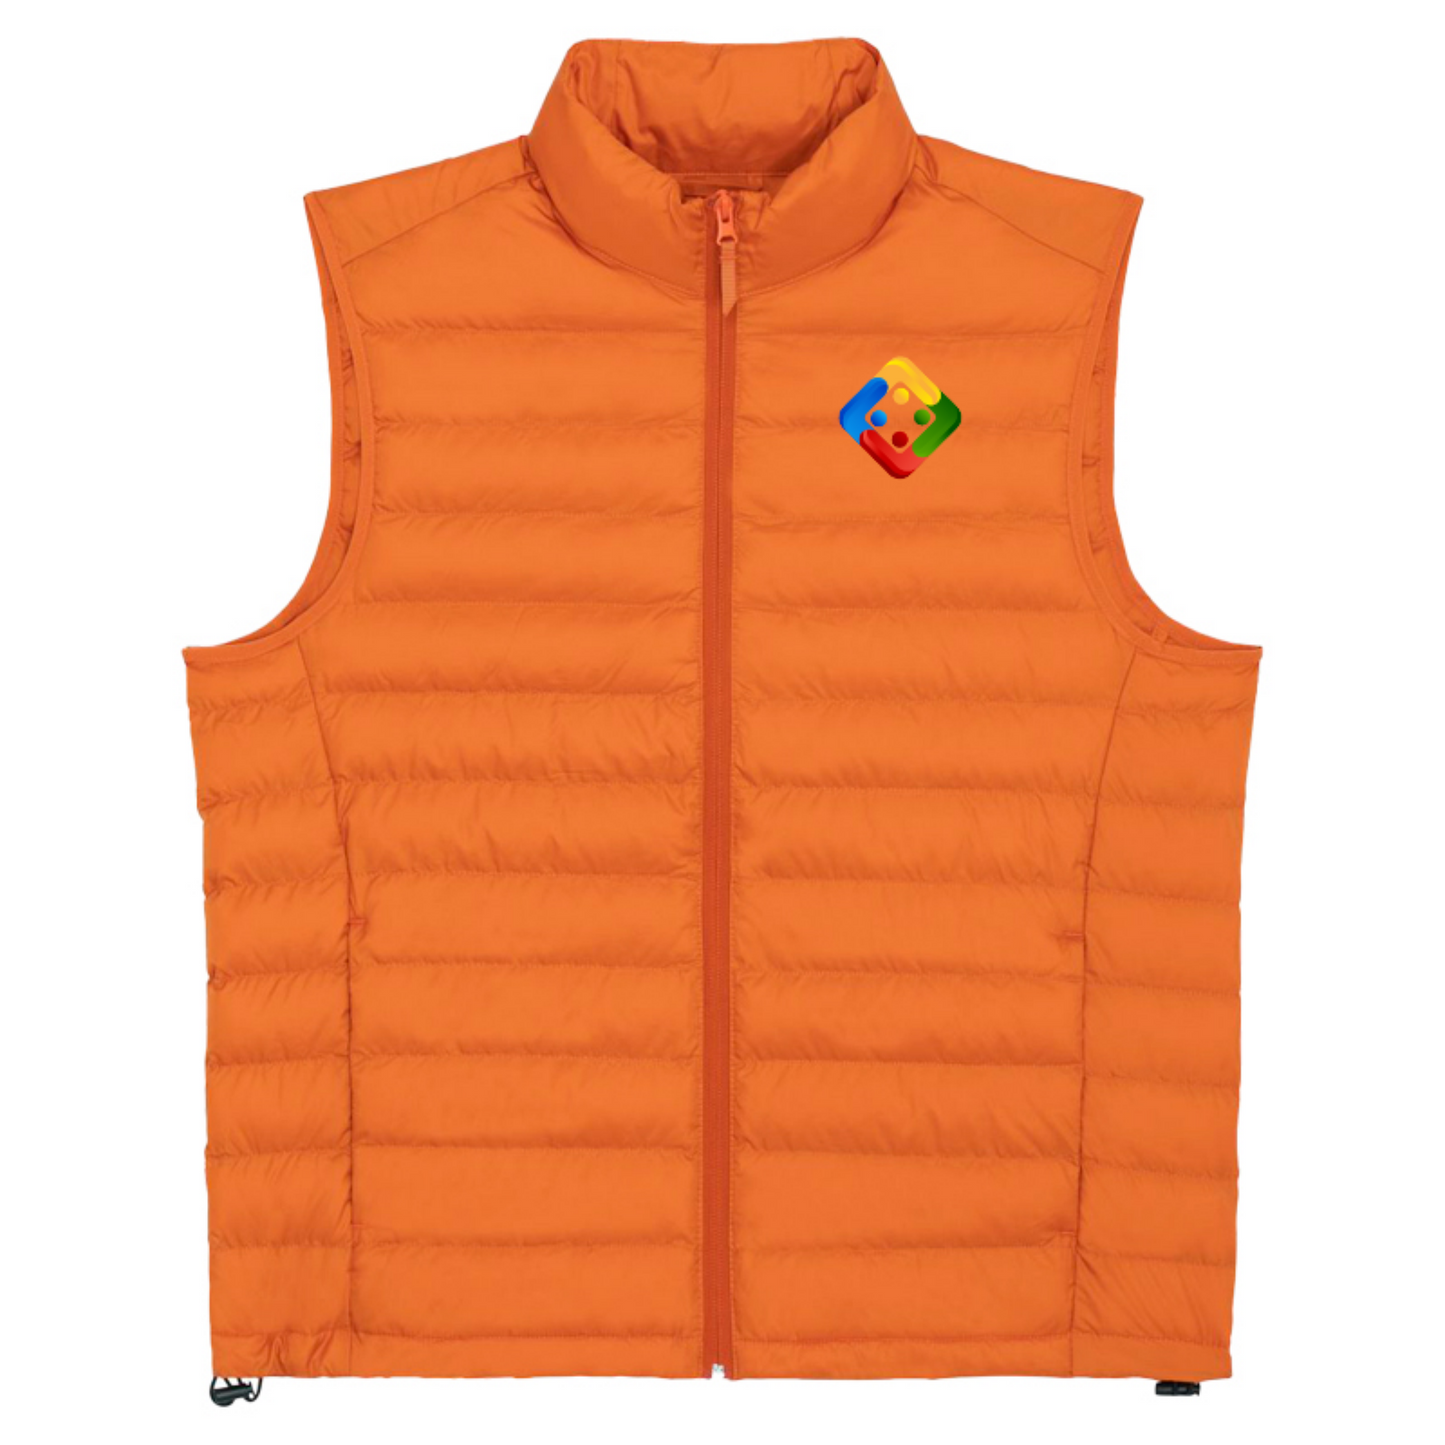 Unisex gilet with embroidered Uckers emblem. Available in 8 colours.